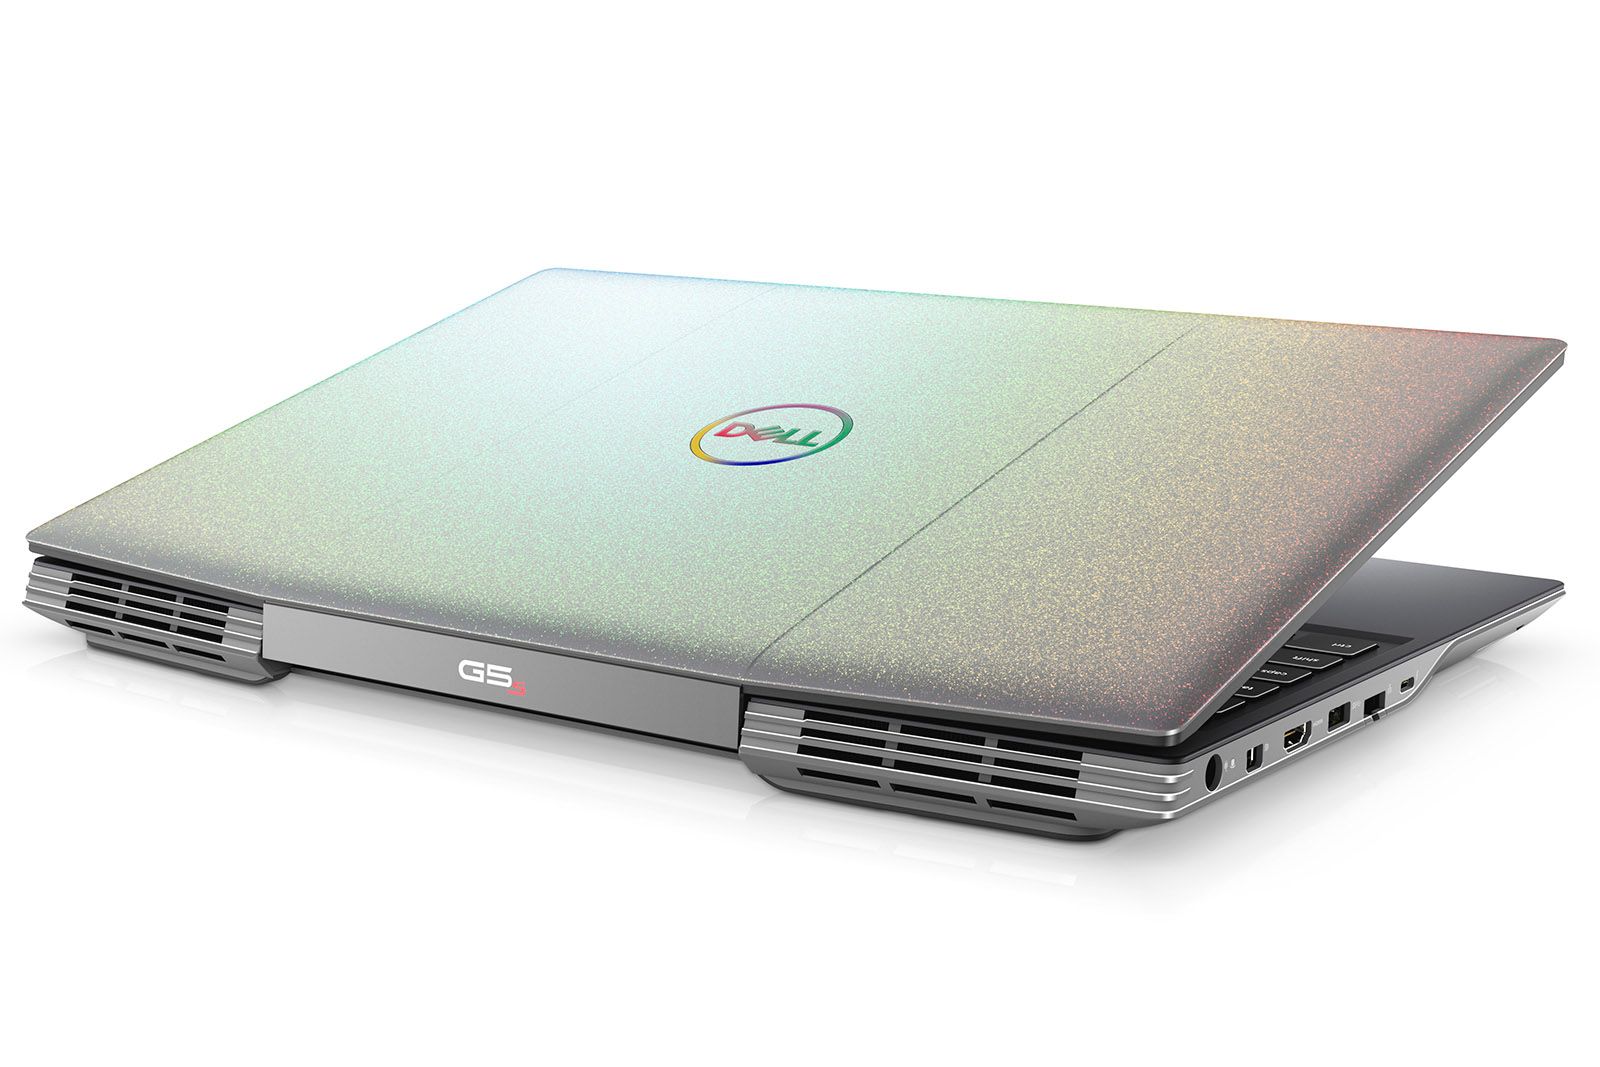 Dell G5 15 Special Edition image 1